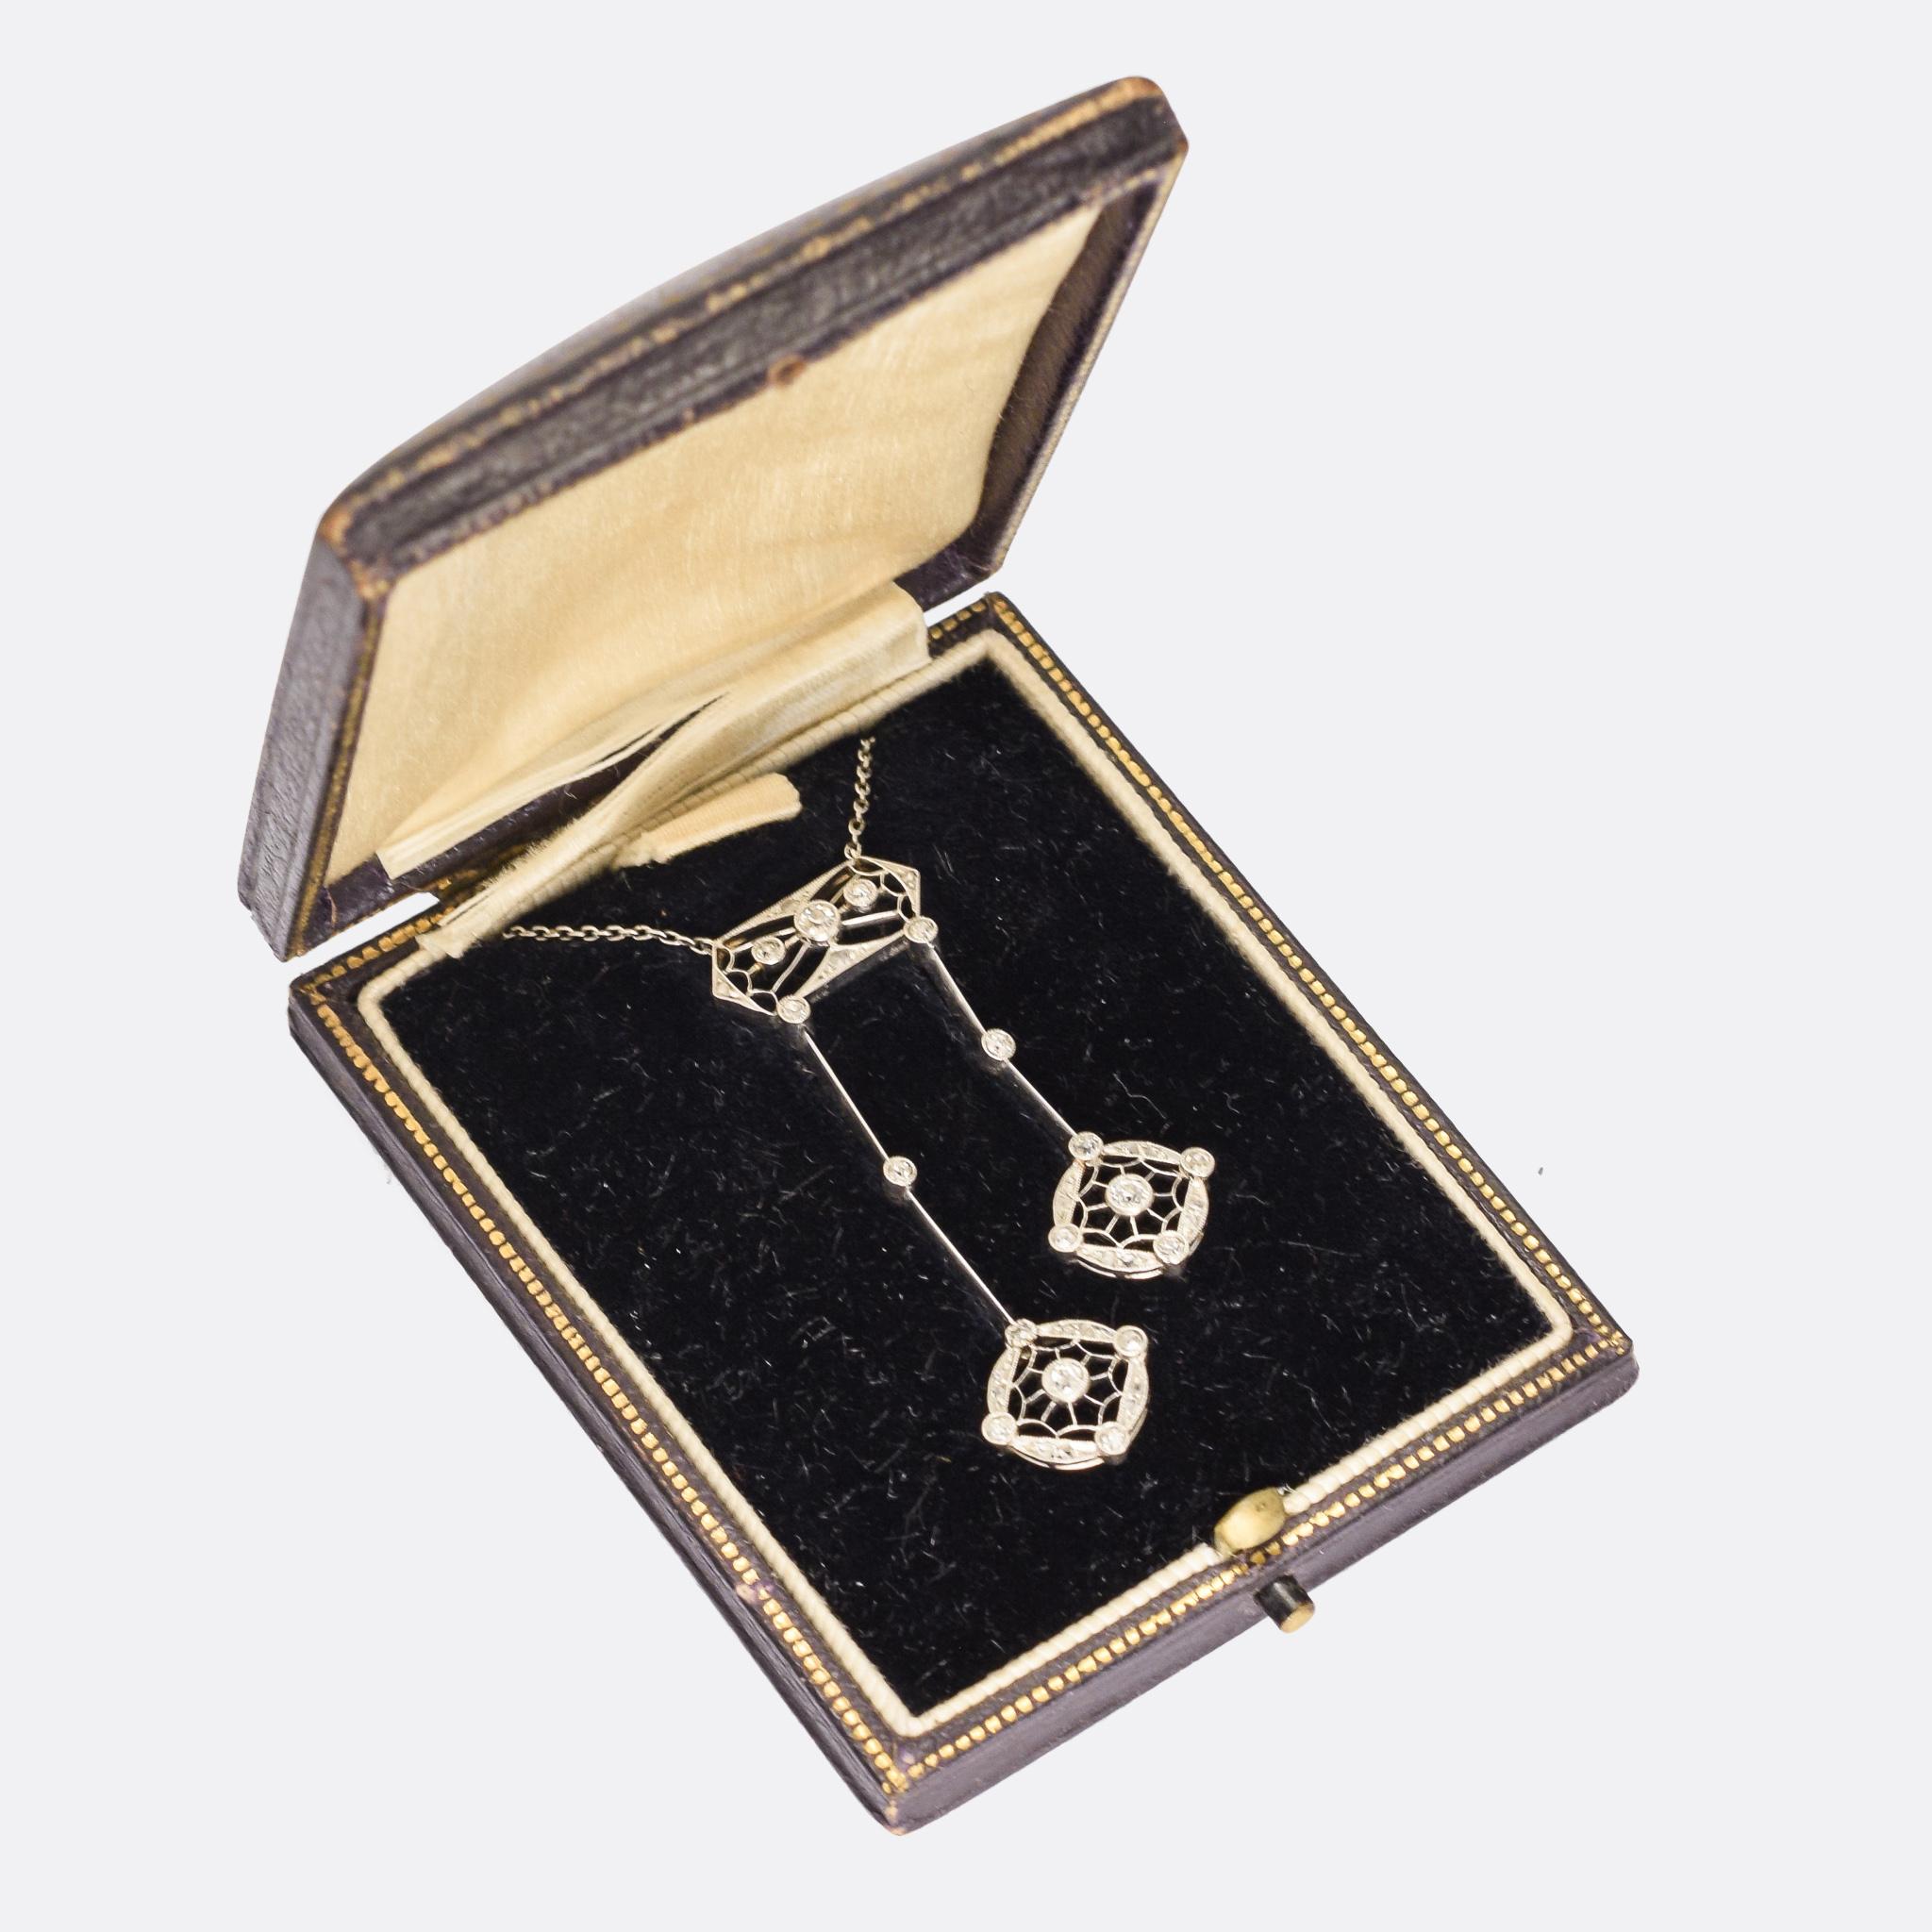 A sublime Edwardian era Negligee Pendant dating from the early 20th Century, circa 1910. It's very finely worked, in platinum throughout, and features a masterclass in openwork and millegrain. Each drop ends with a round, diamond-set, feature with a